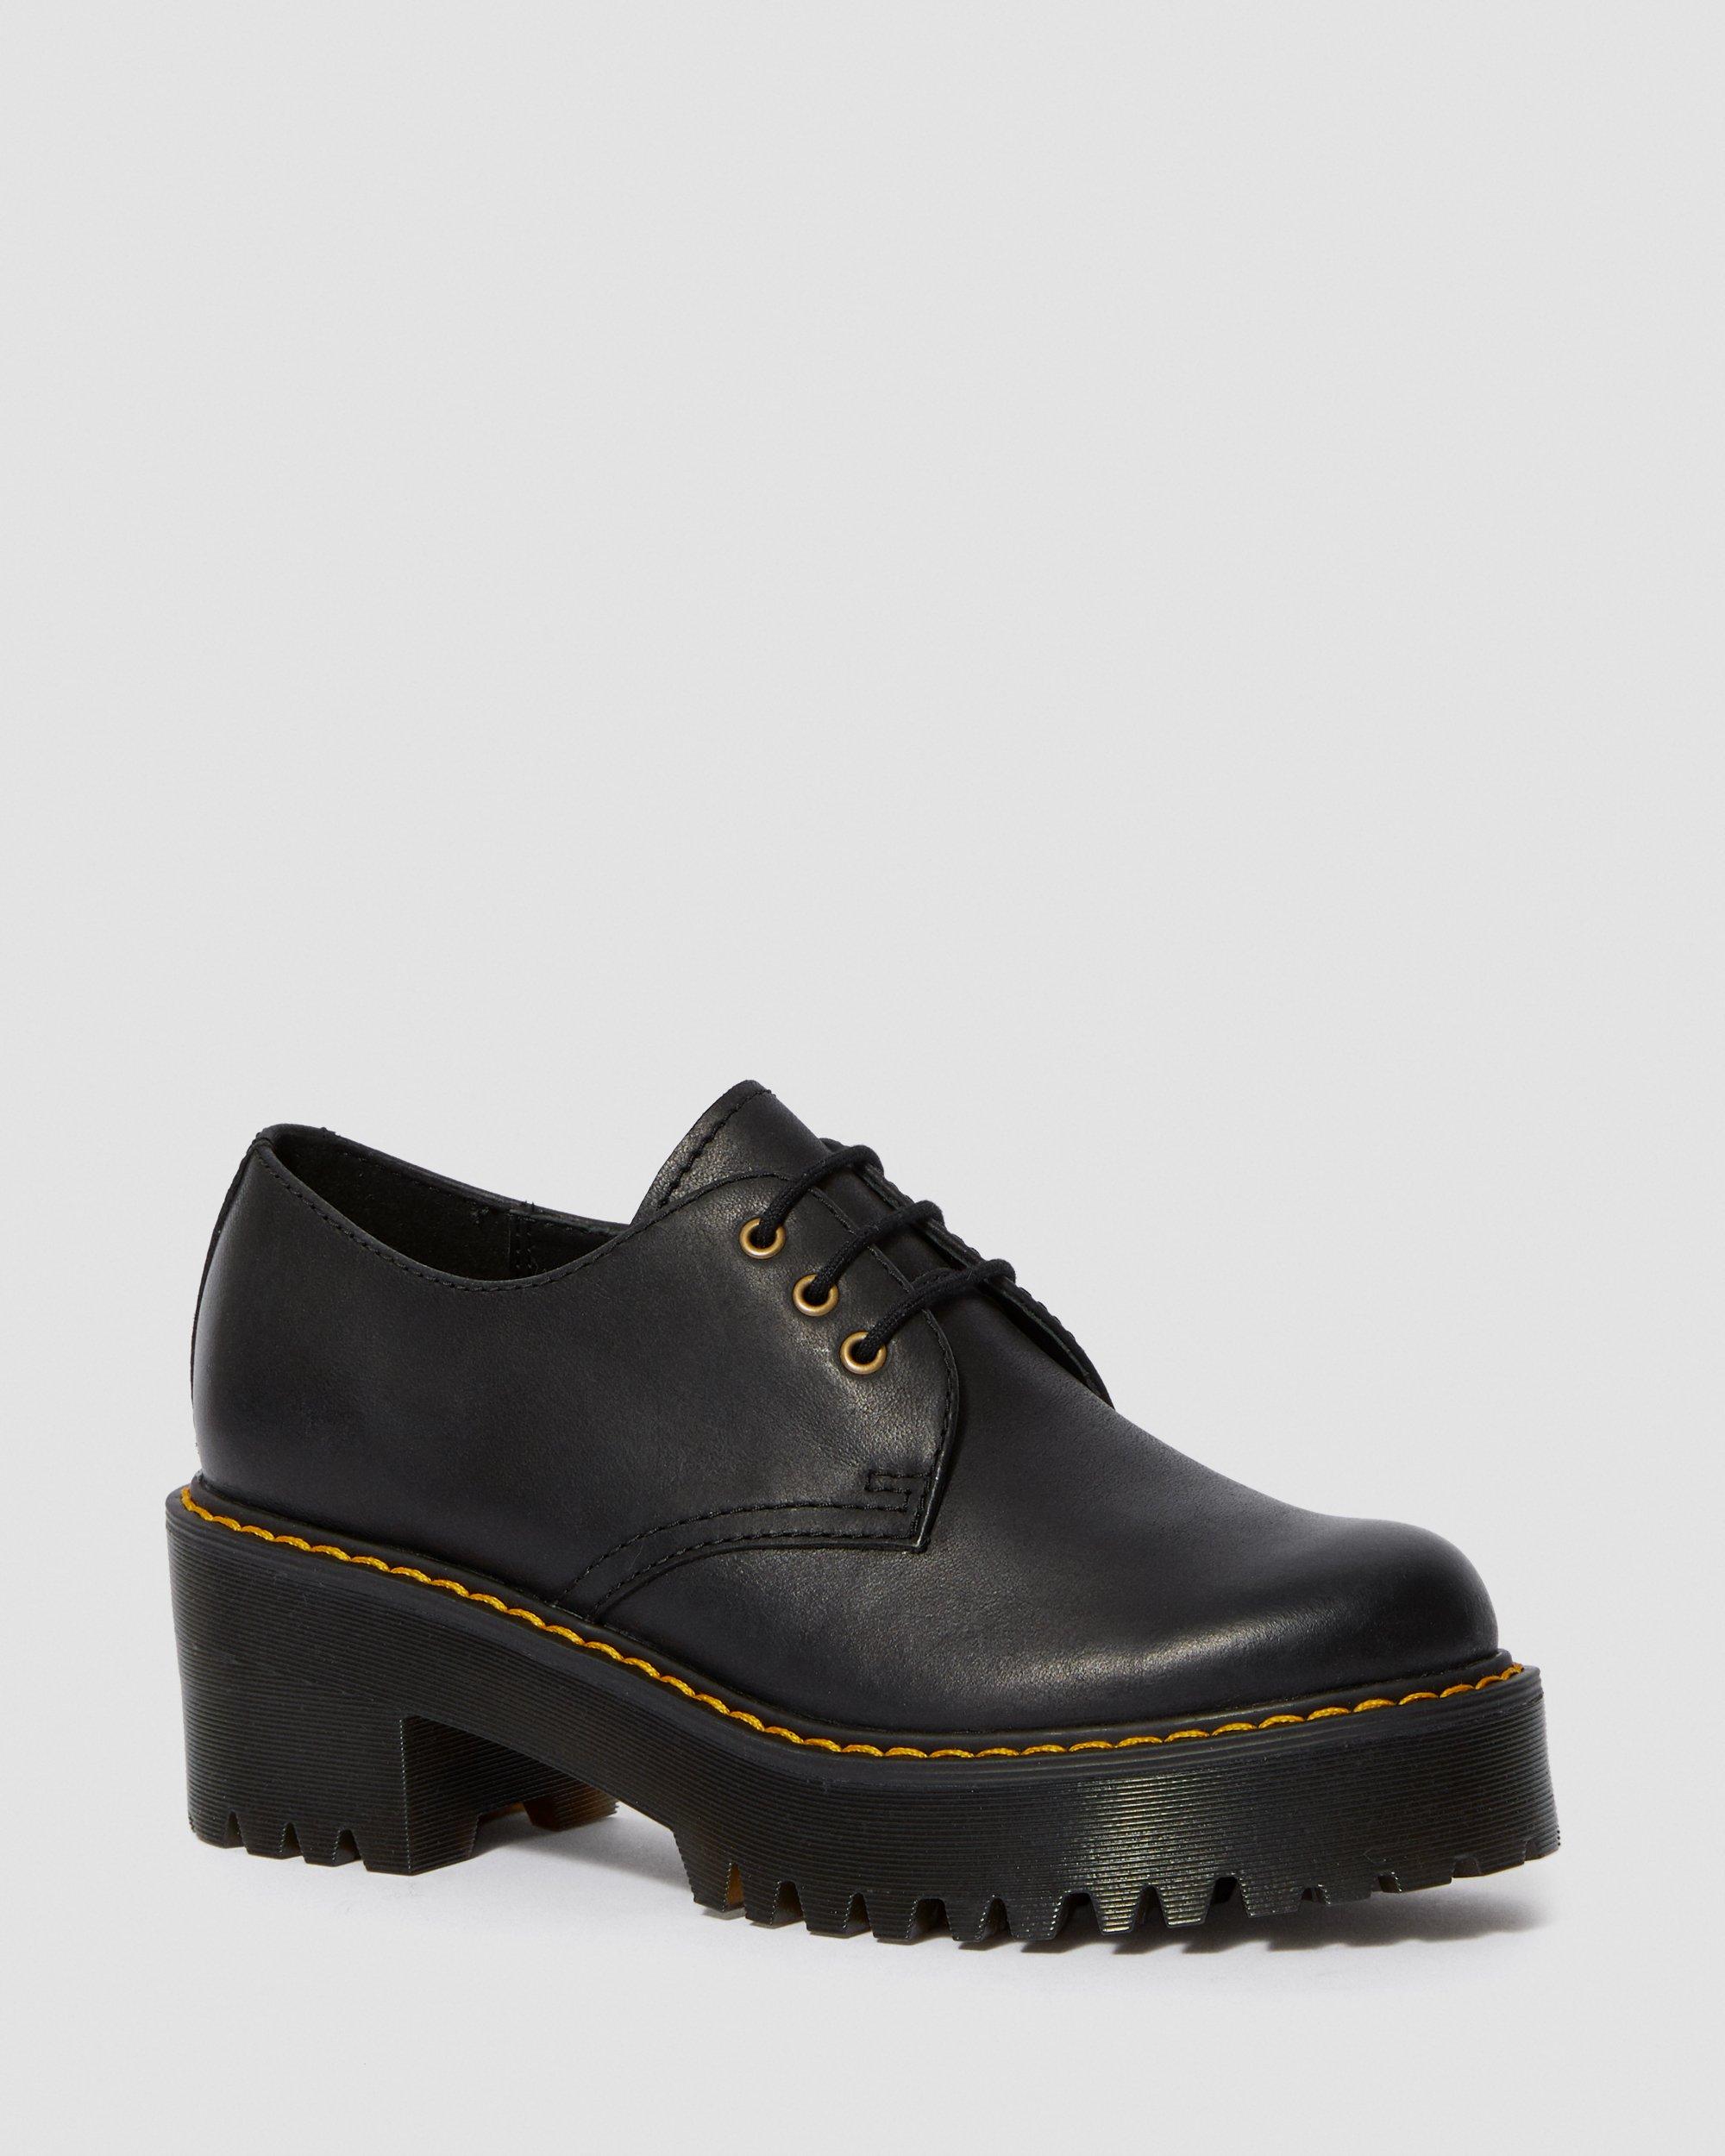 WYOMING LEATHER HEELED SHOES | Dr. Martens